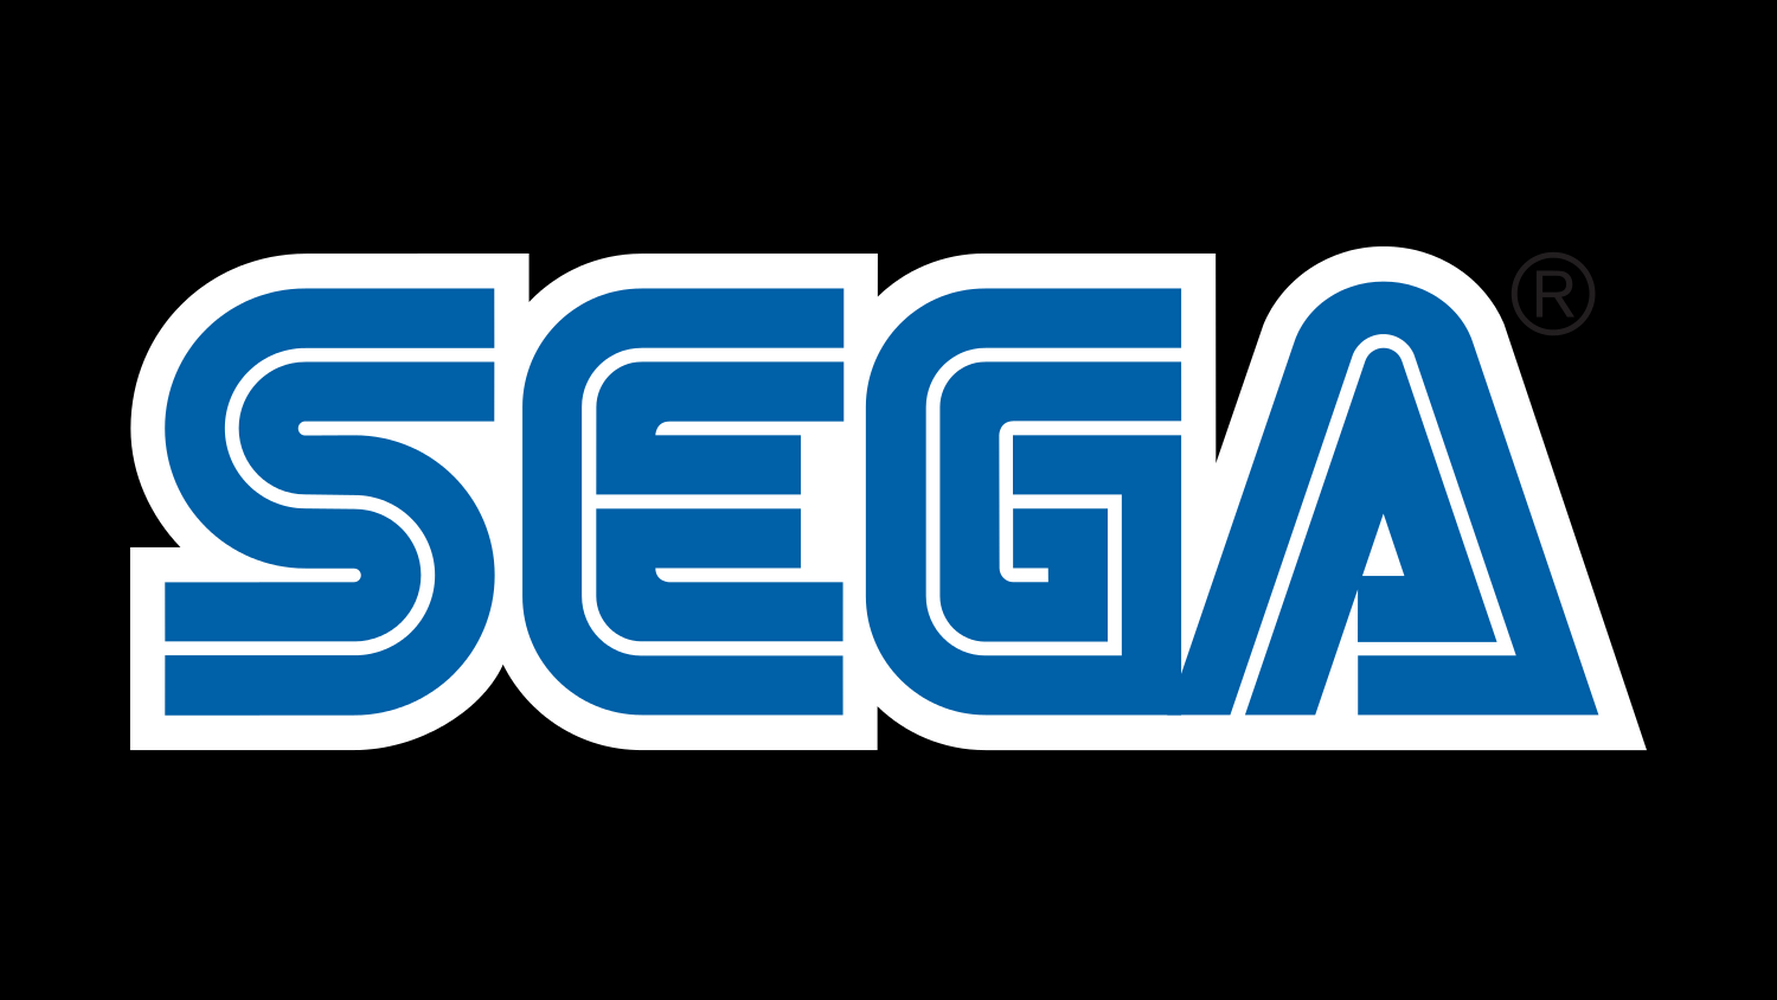 SEGA Says They Are ‘Honored’ Microsoft & Others Want to Acquire the Company